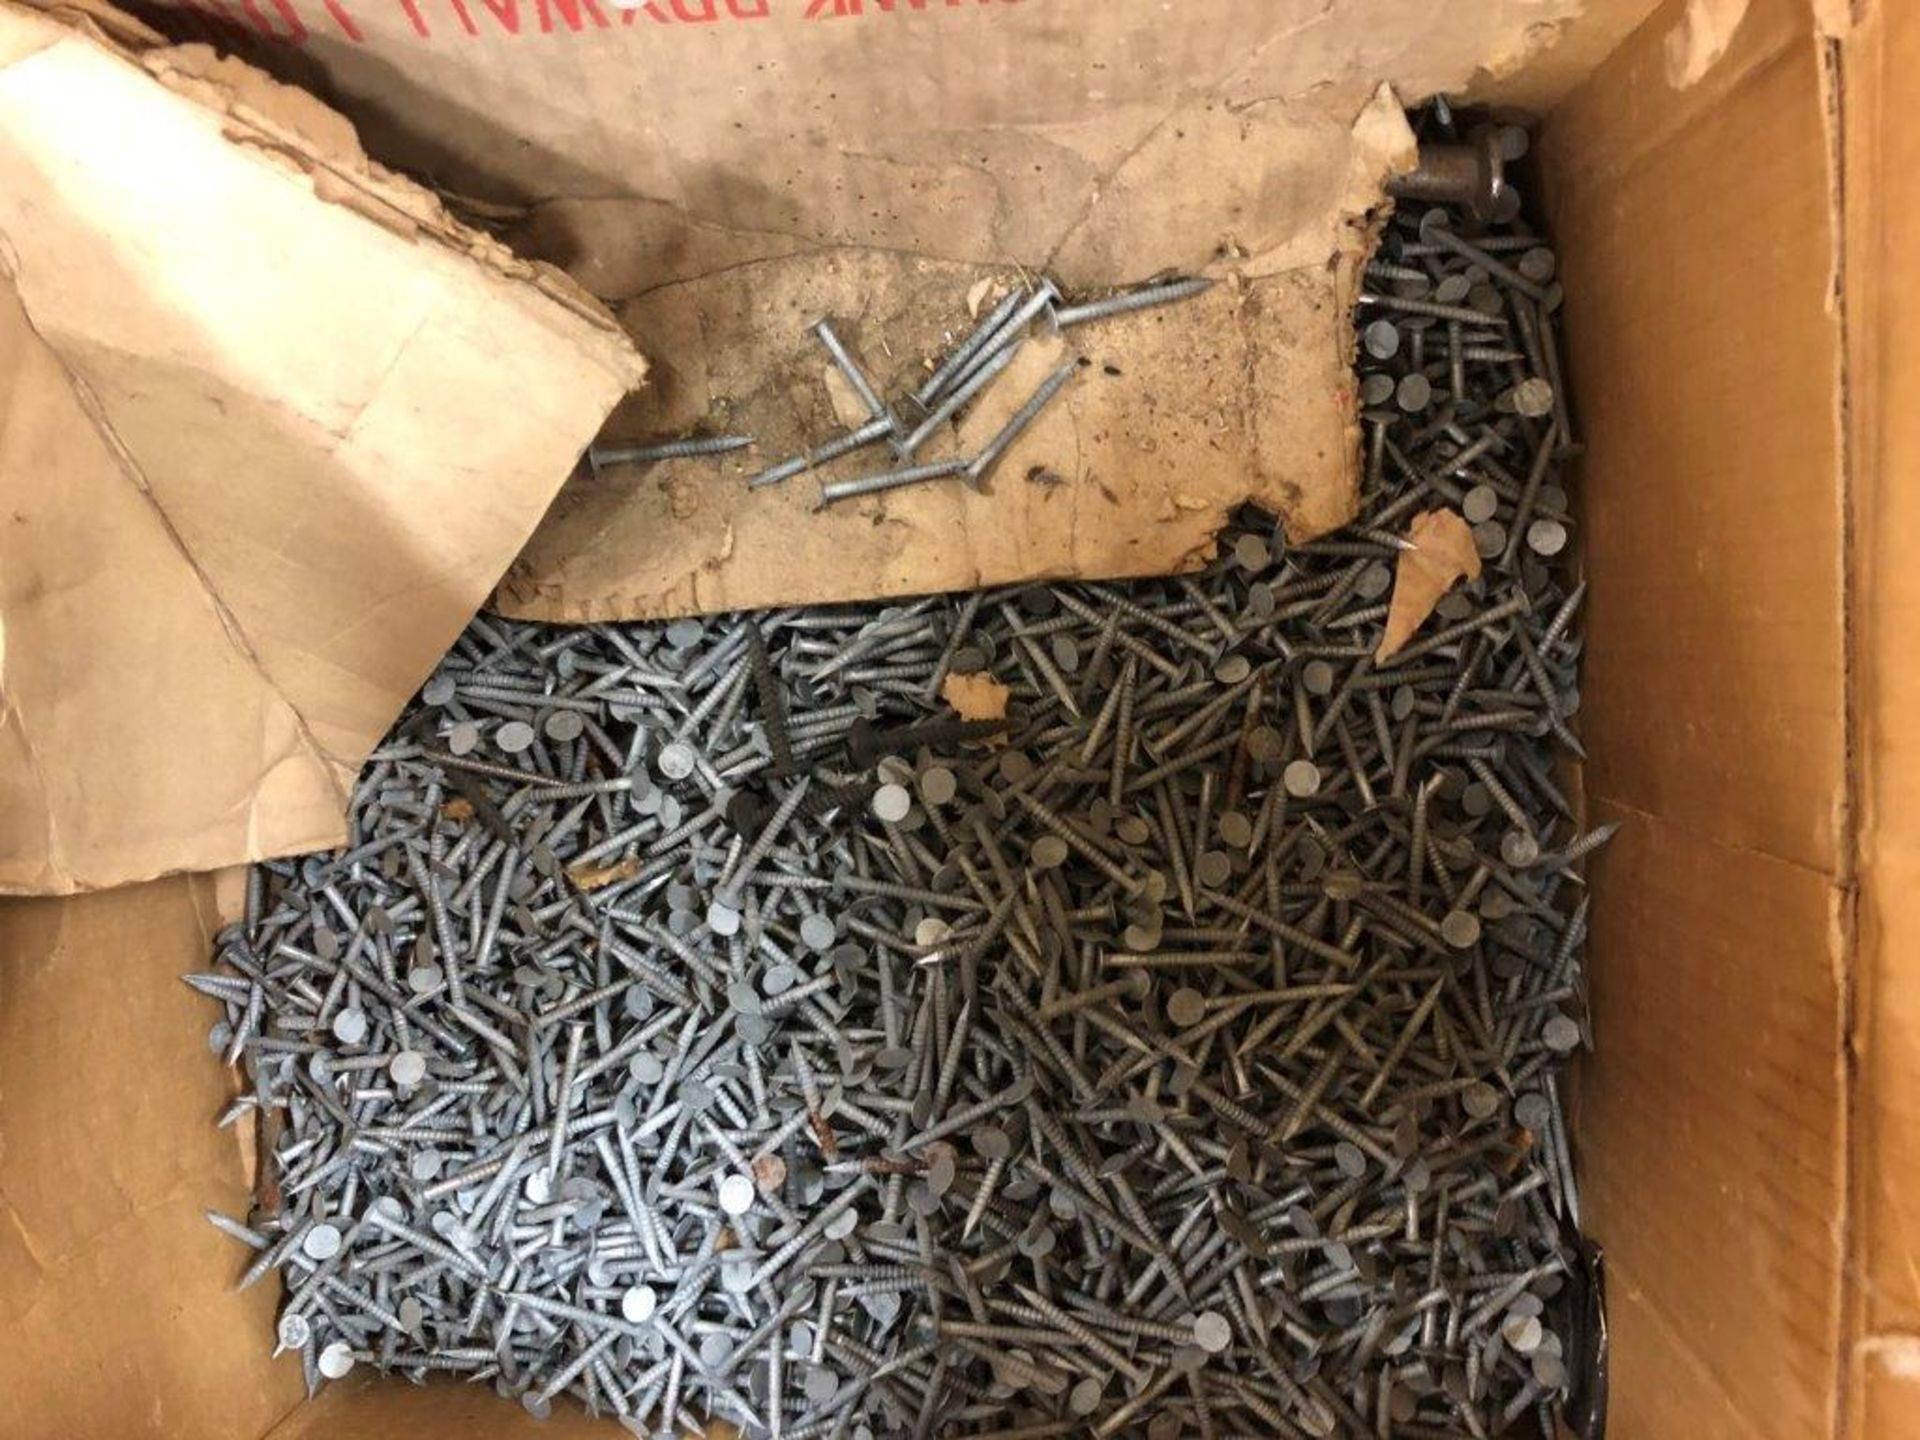 ASSORTMENT OF NAILS AND SCREWS - 93B - Image 3 of 3